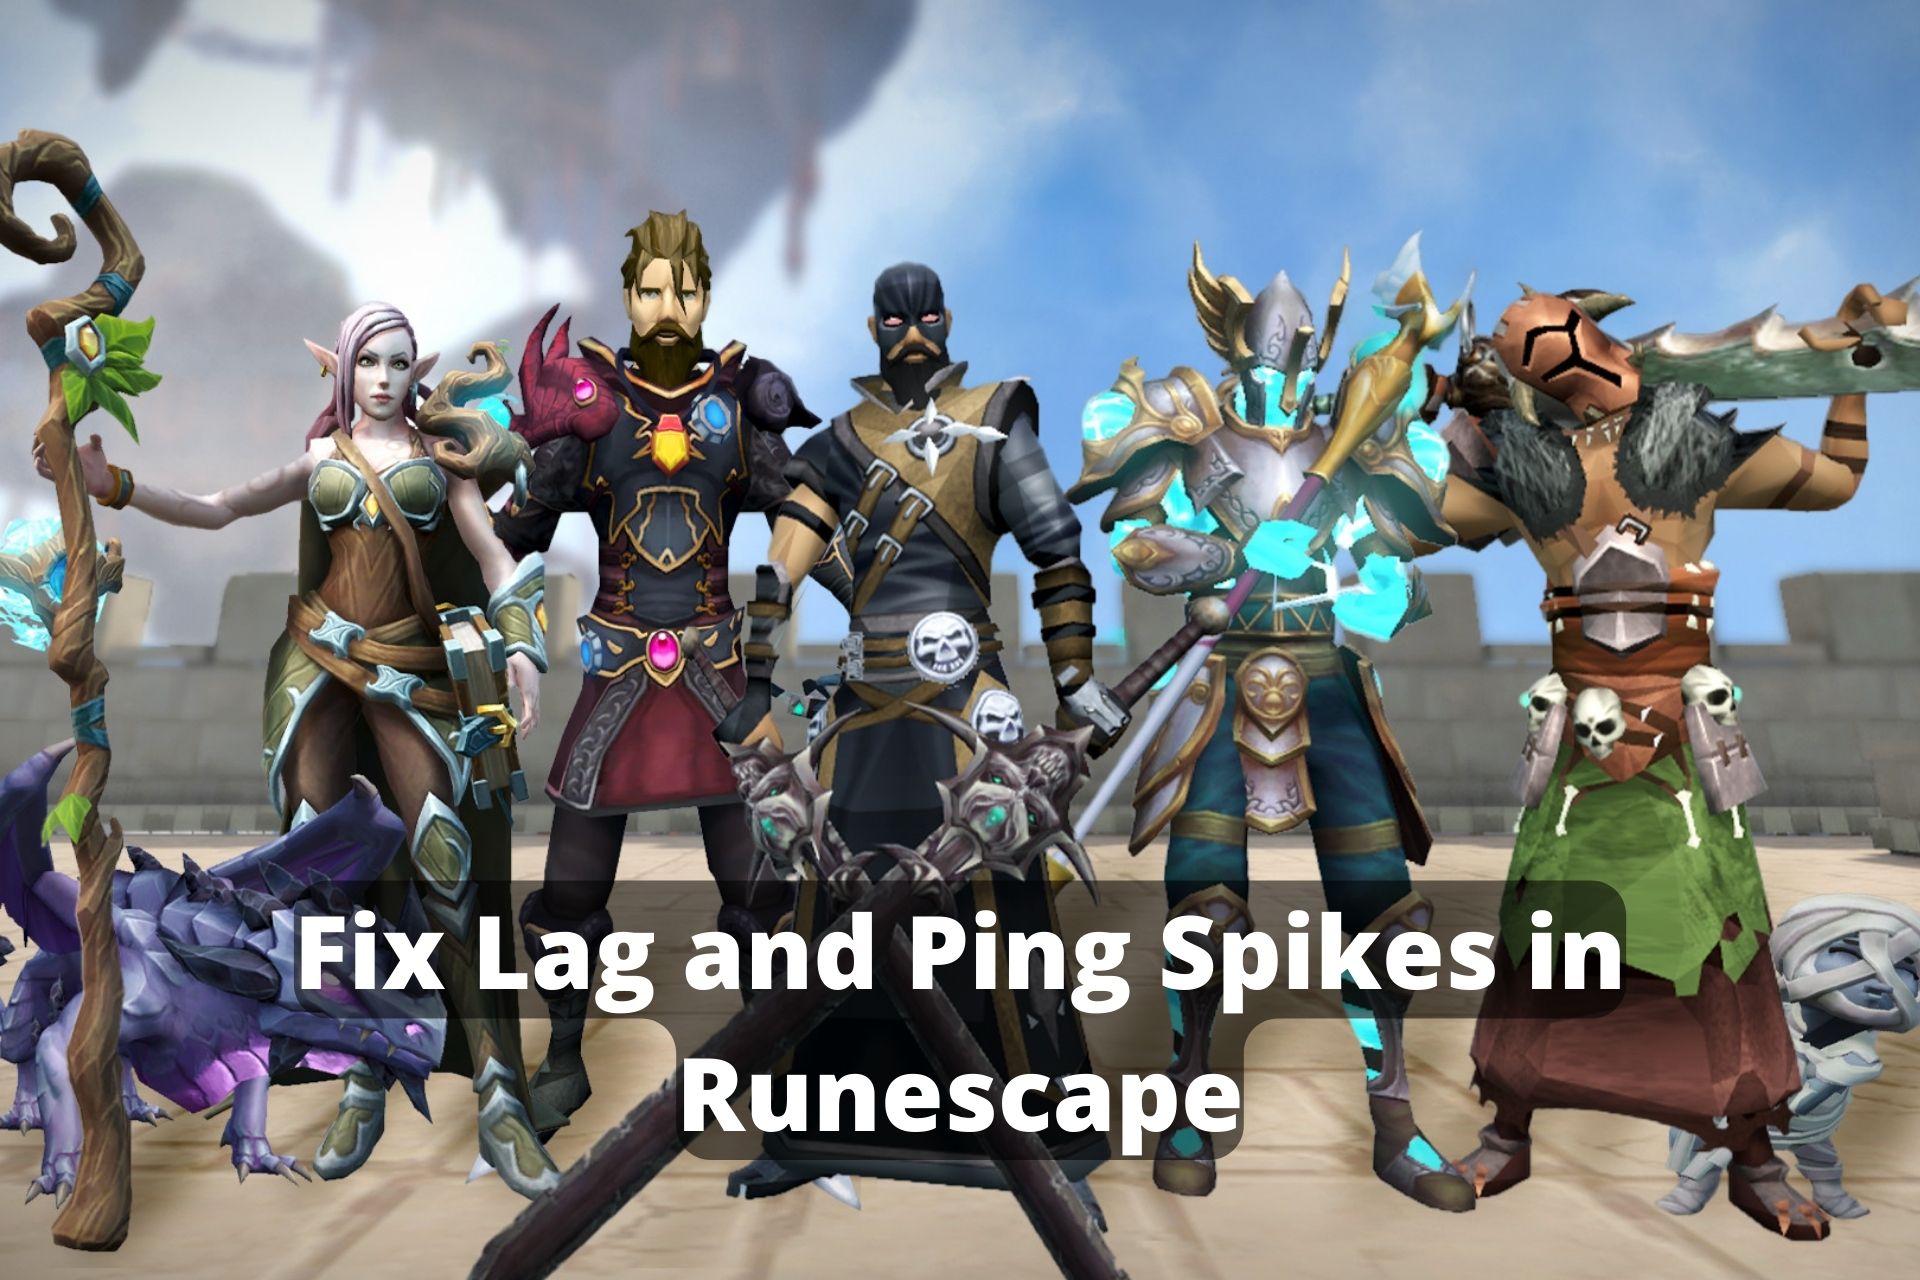 Runescape High Ping & Lag Spikes: Quick Fix [Tested]